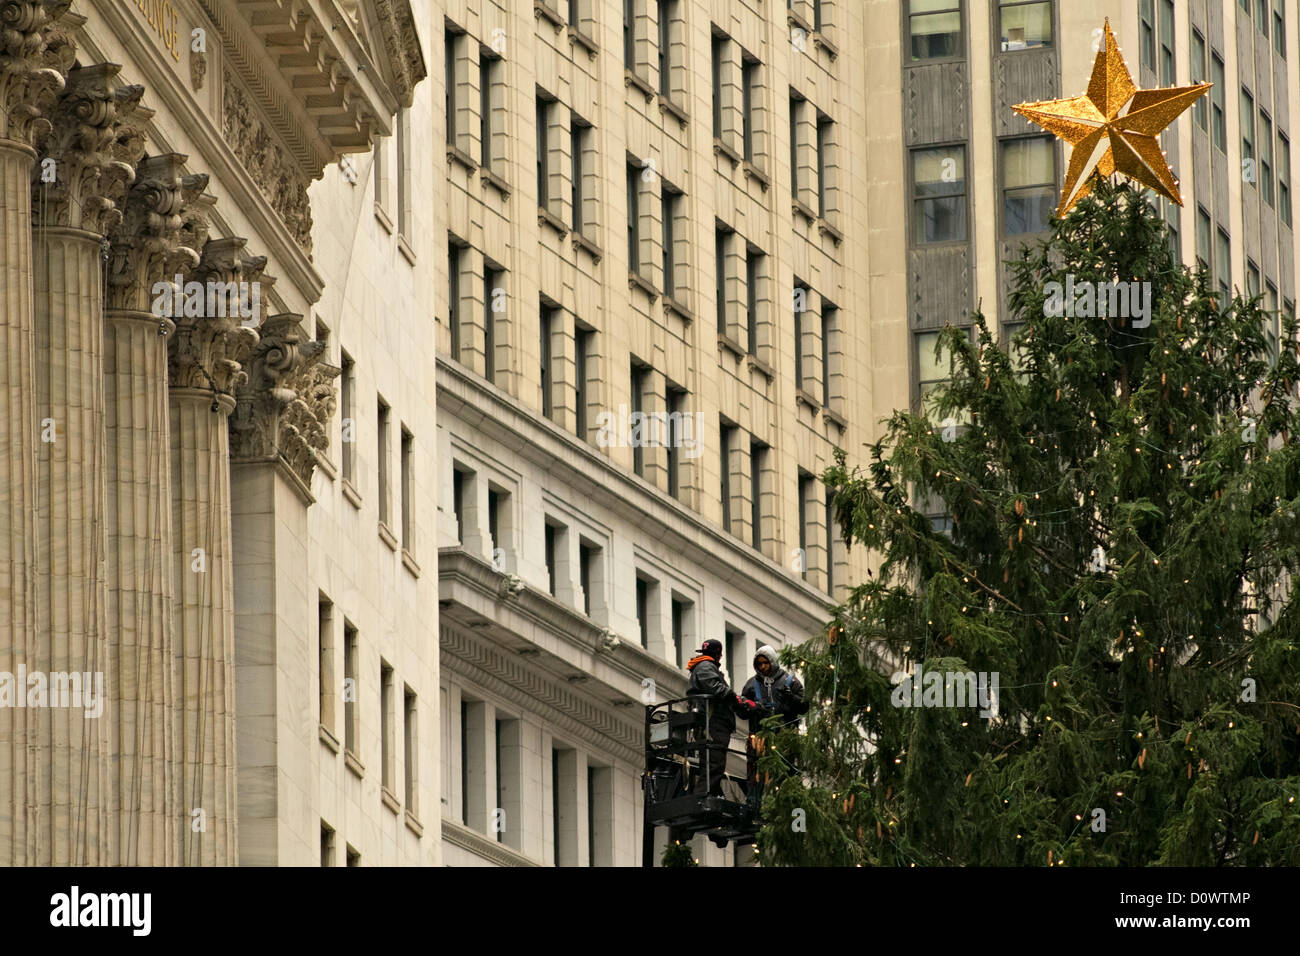 December 1, 2012, New York, NY.  Workers string lights on Christmas tree outside New York Stock Exchange to prepare for lighting ceremony on December 4. Stock Photo